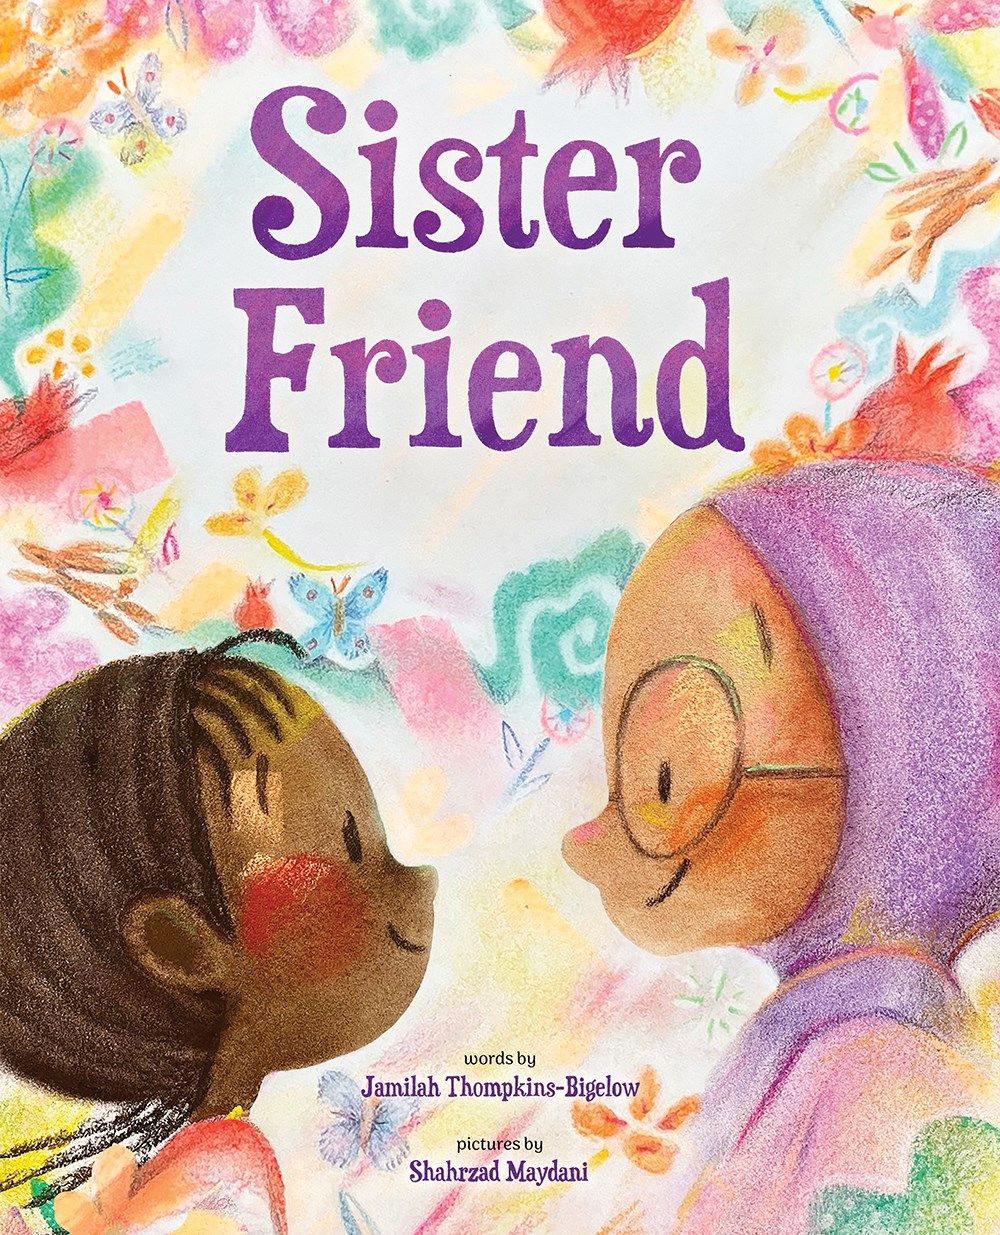 Cover of Sister Friend by Jamilah Thompkins-Bigelow & Shahrzad Maydani